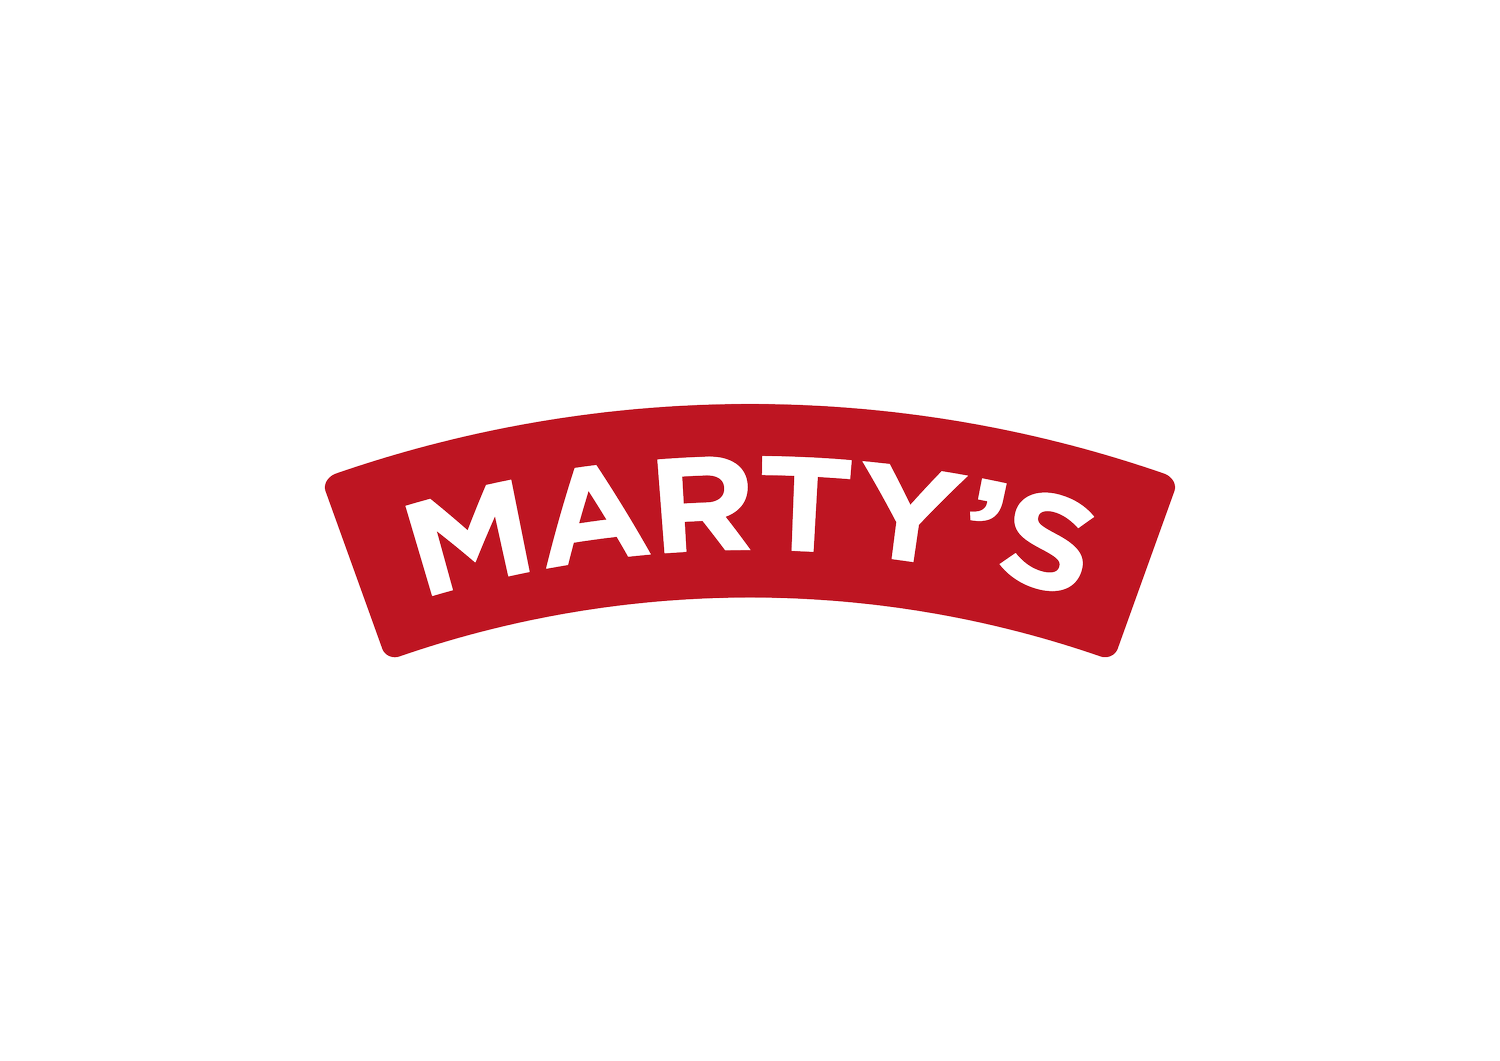  MARTY&#39;S SPICED TOMATO JUICE